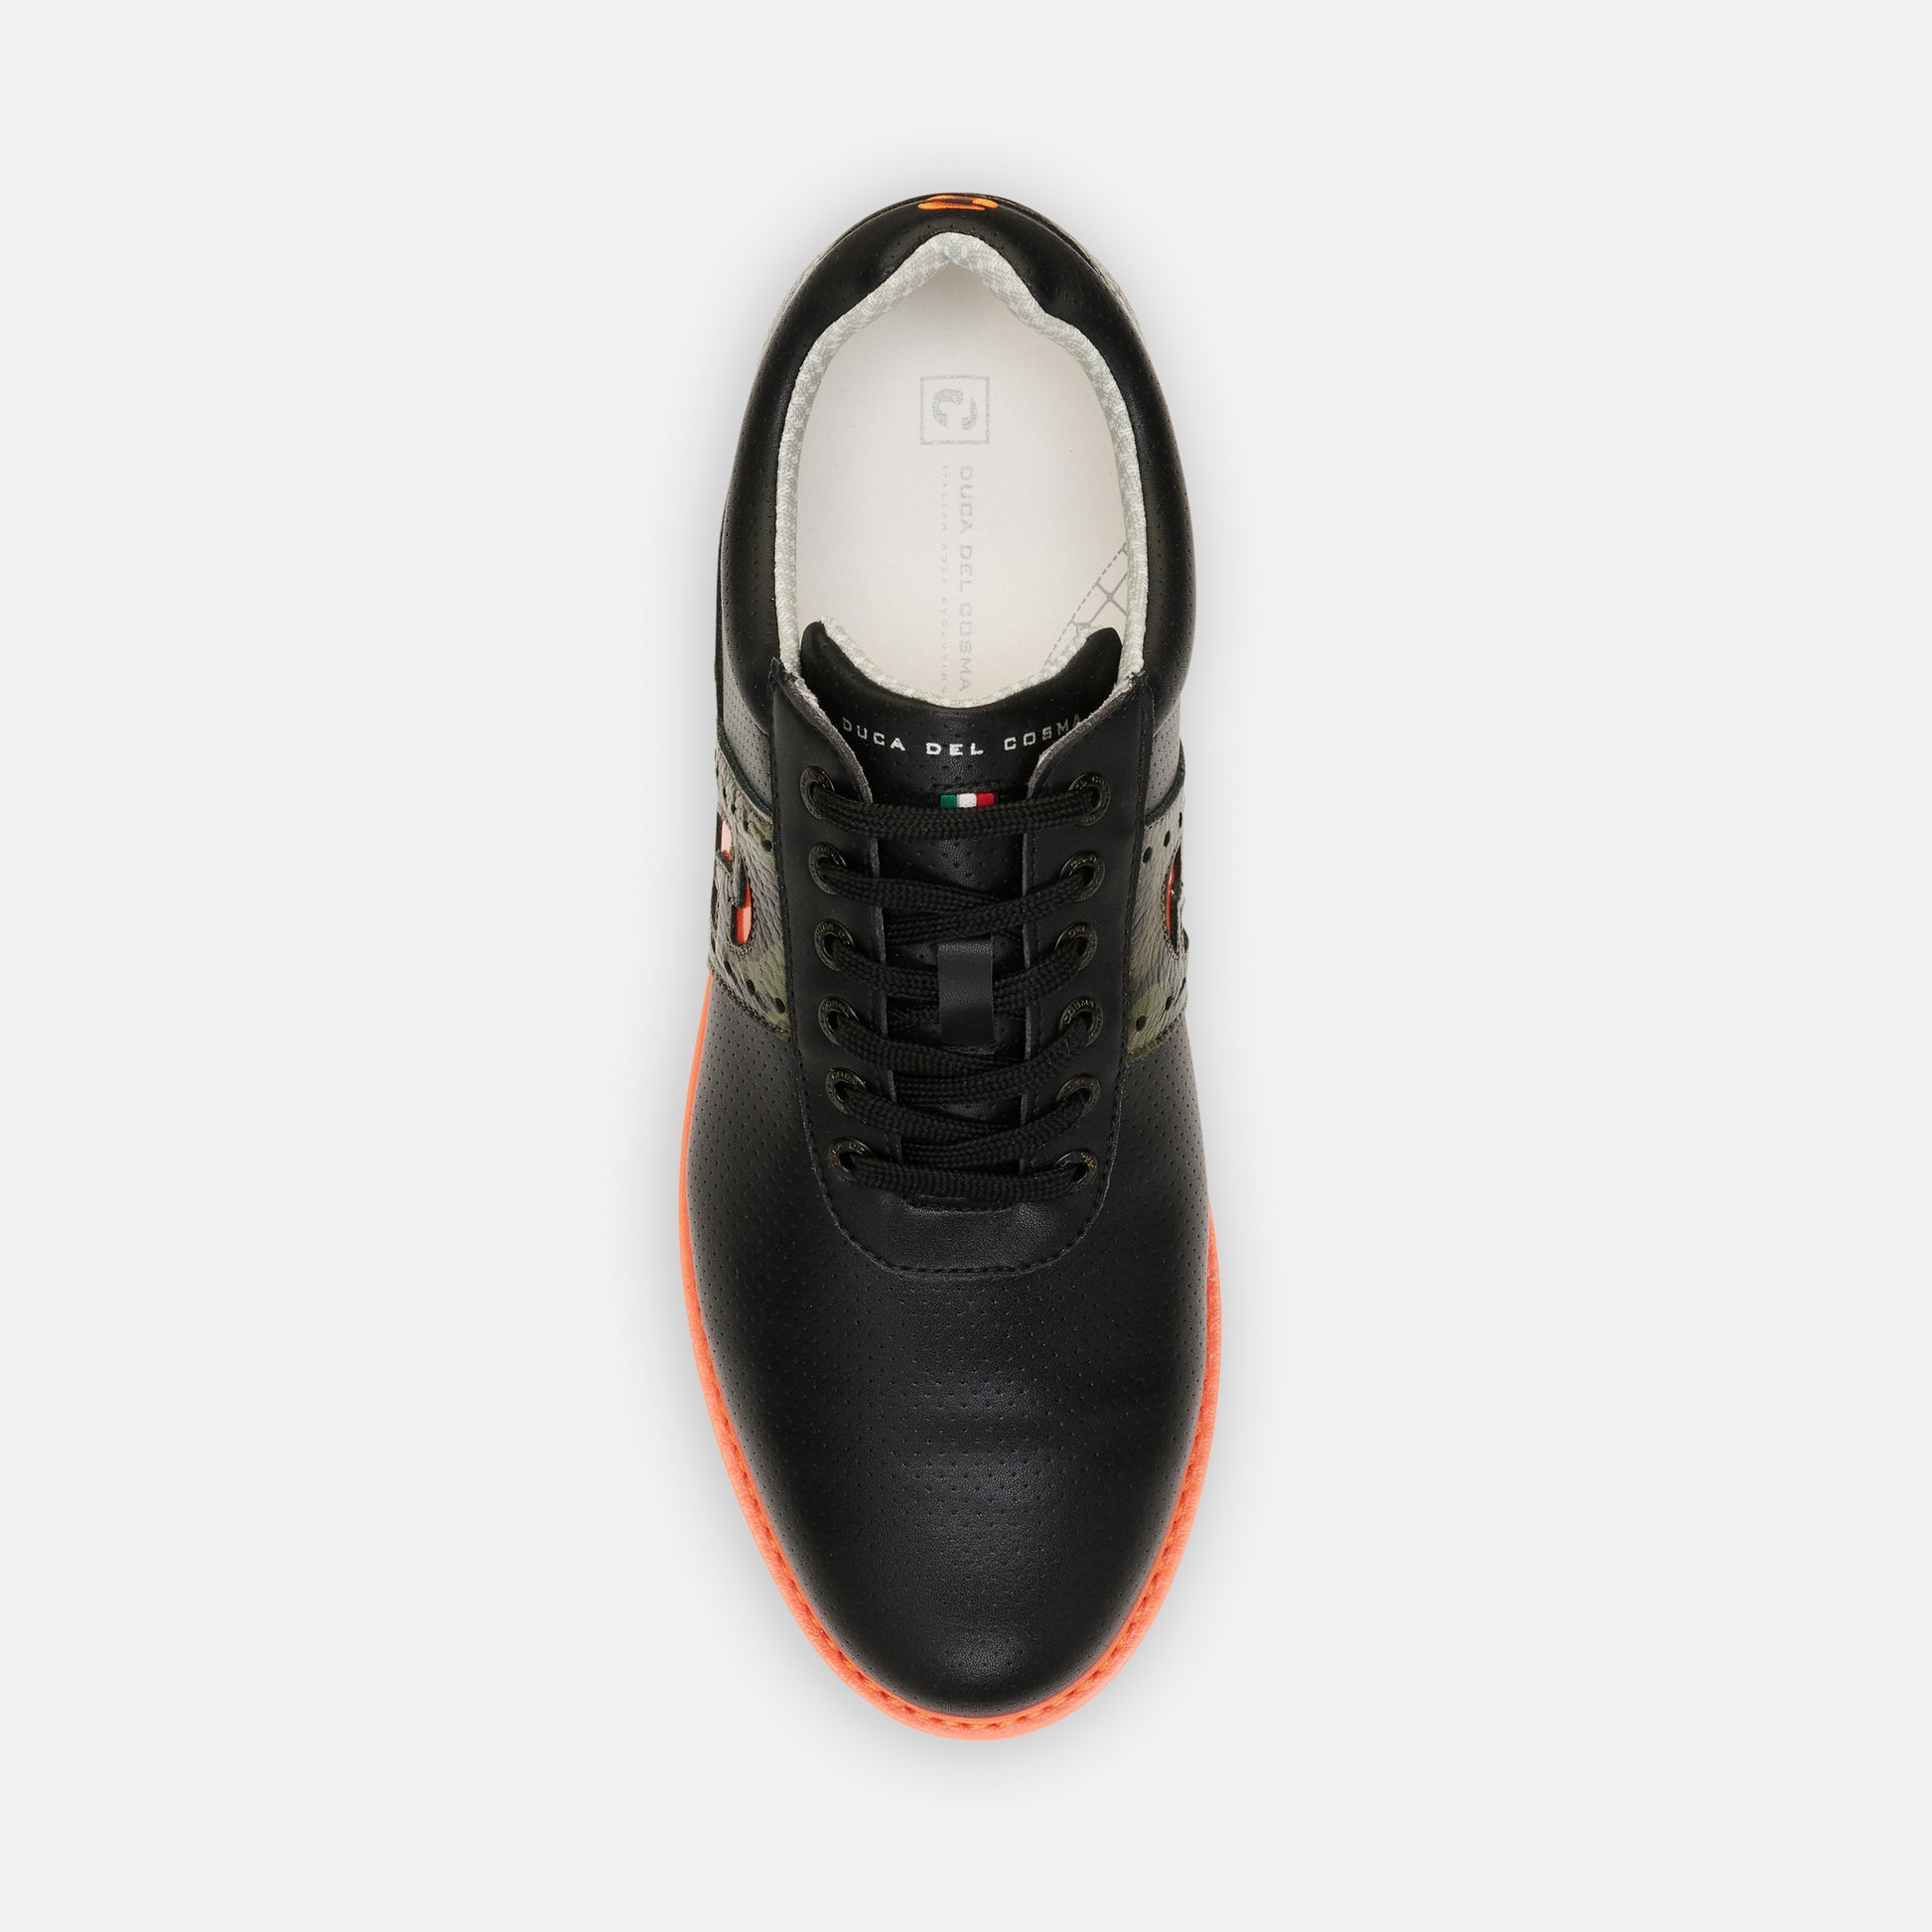 JL1 waterproof Black Men's Golf Shoe by Duca del Cosma is made by a tour player for the best